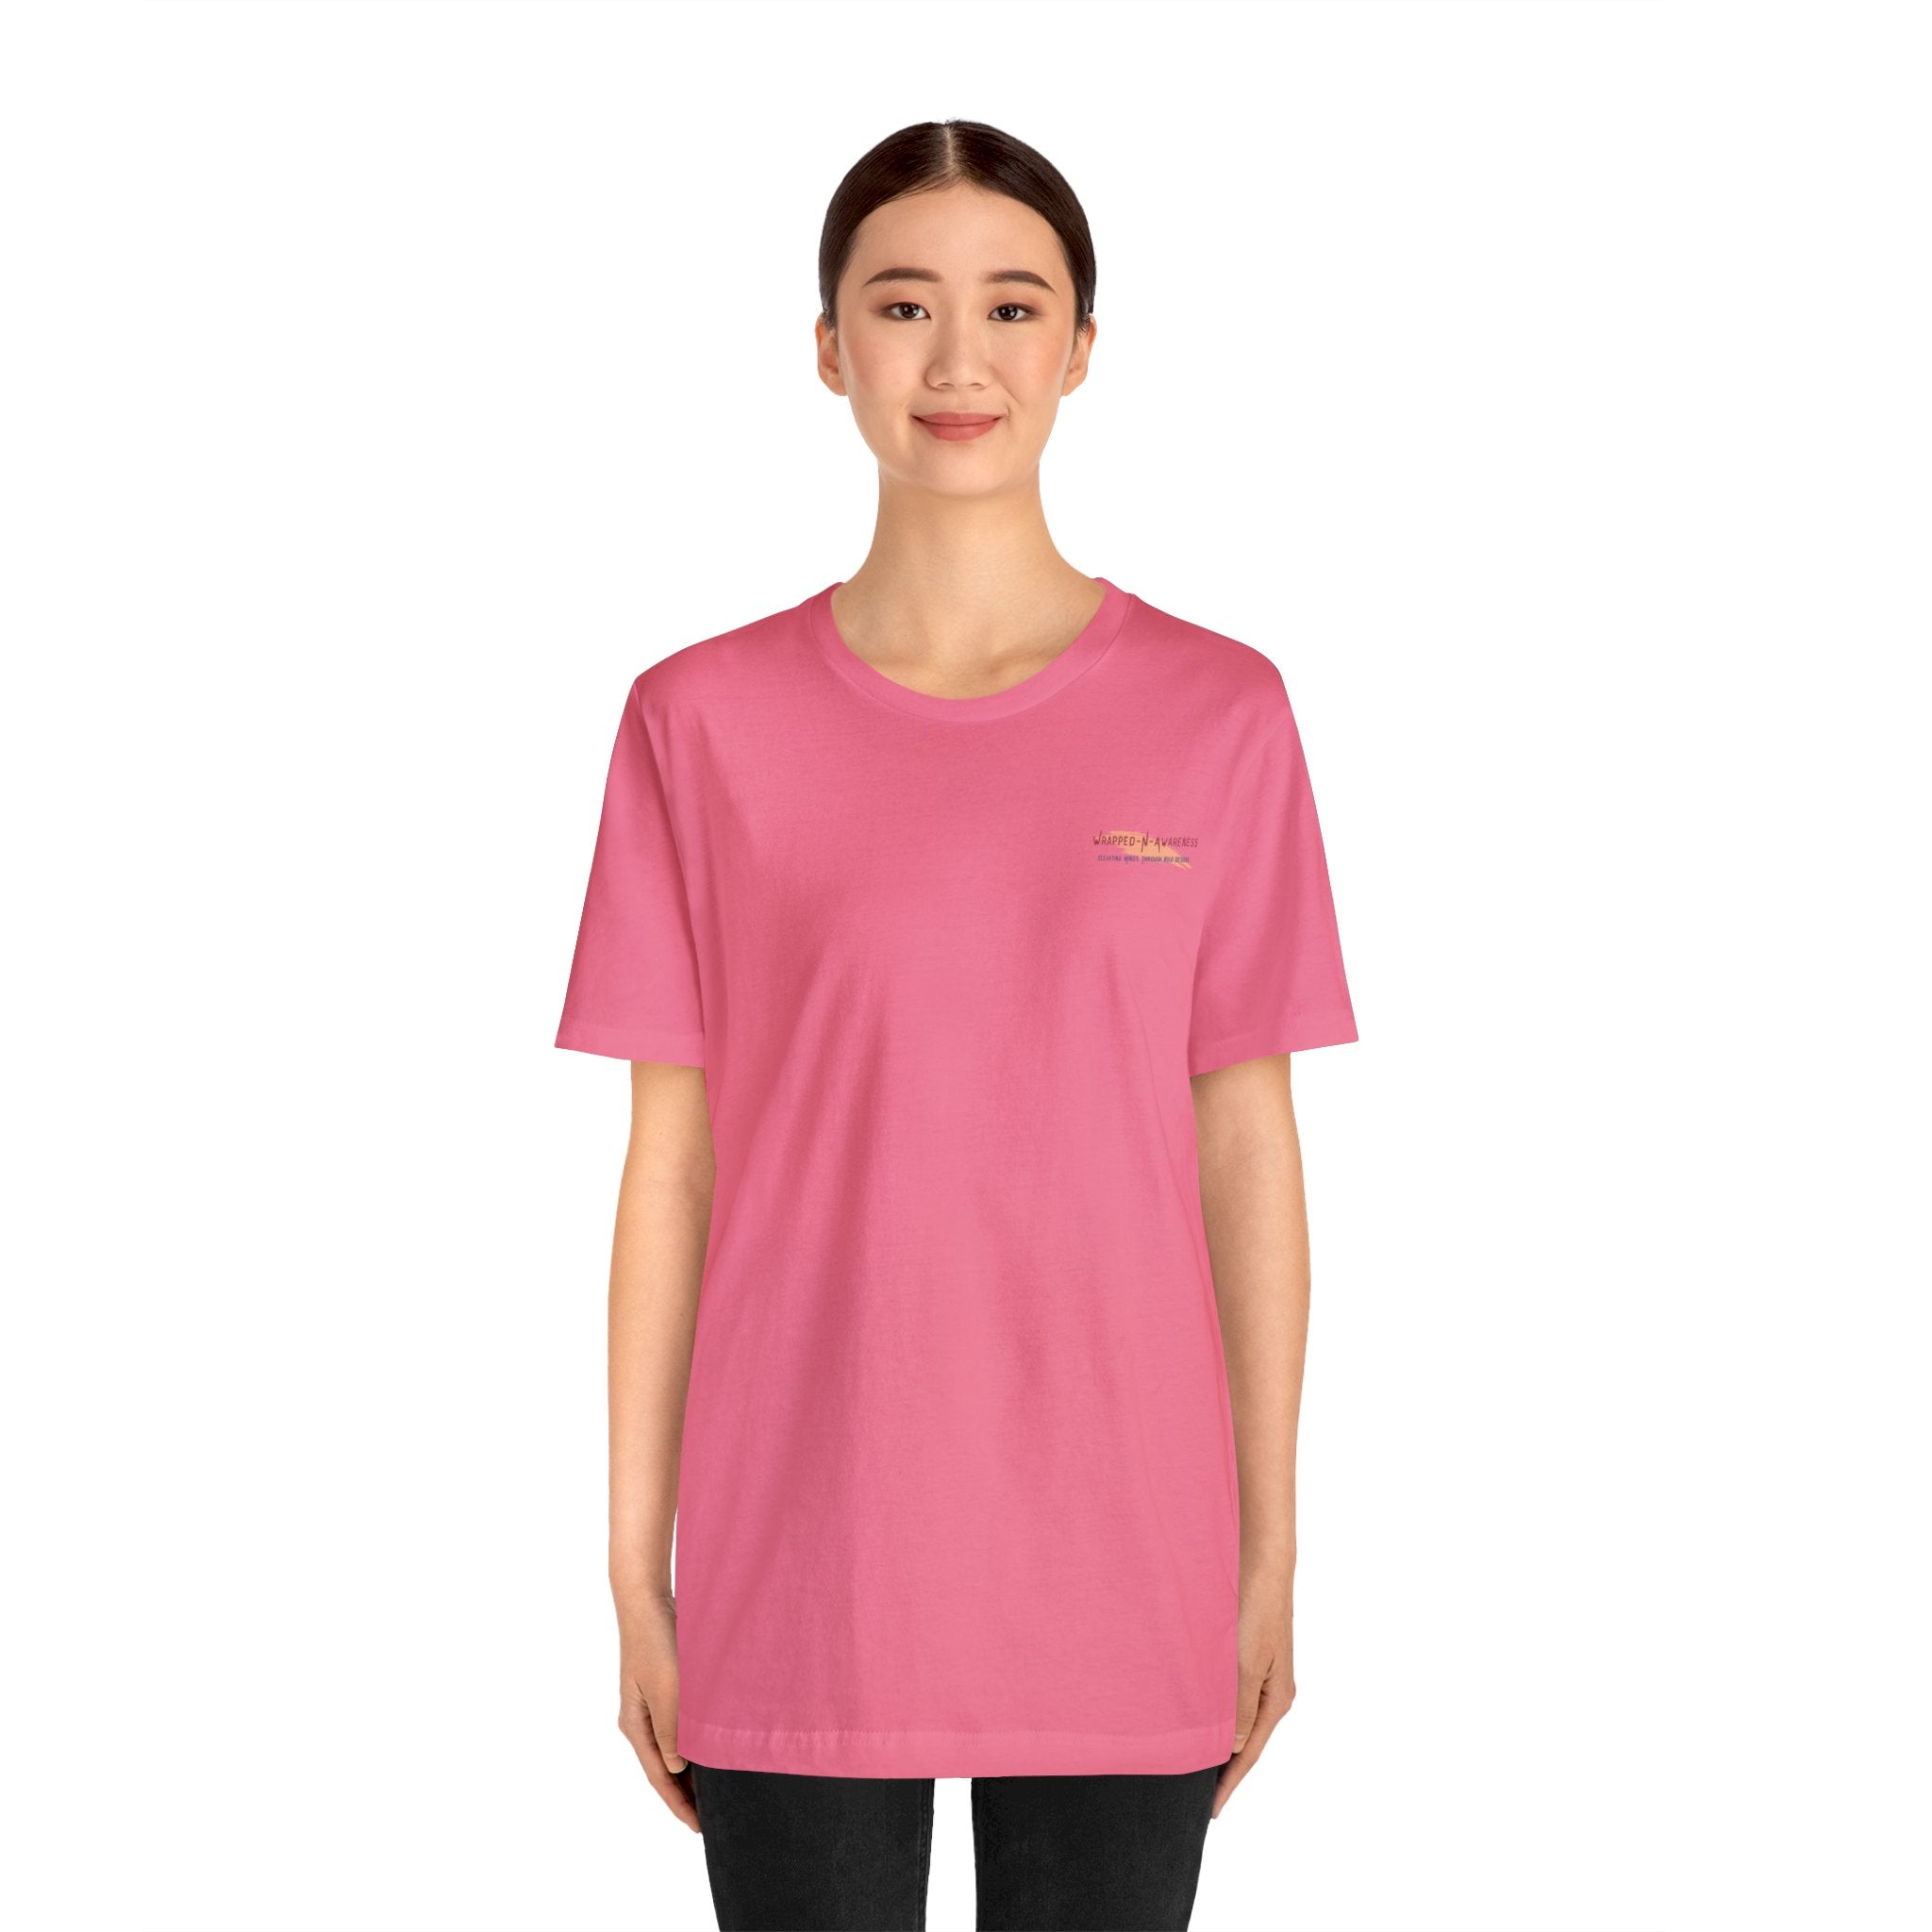 Brave Blossoms Jersey Tee - Bella+Canvas 3001 Charity Pink Classic Tee Comfortable Tee Cotton T-Shirt Graphic Tee JerseyTee Statement Shirt T-shirt Tee Unisex Apparel T-Shirt 760334370554293274_2048 Printify